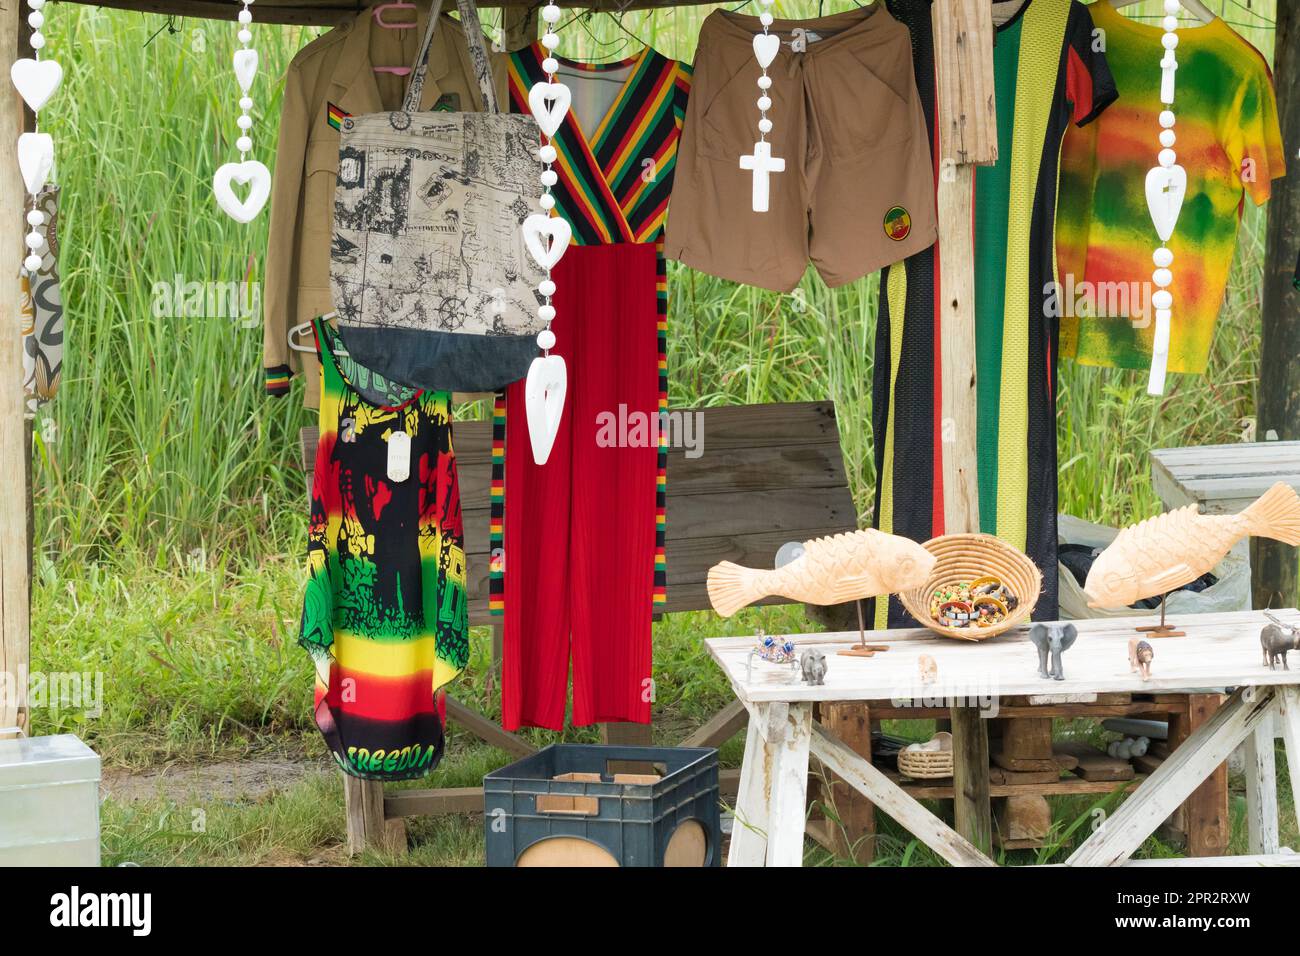 roadside market stall selling rastafarian style, design clothes and objects with no people in Johannesburg, South Africa Stock Photo